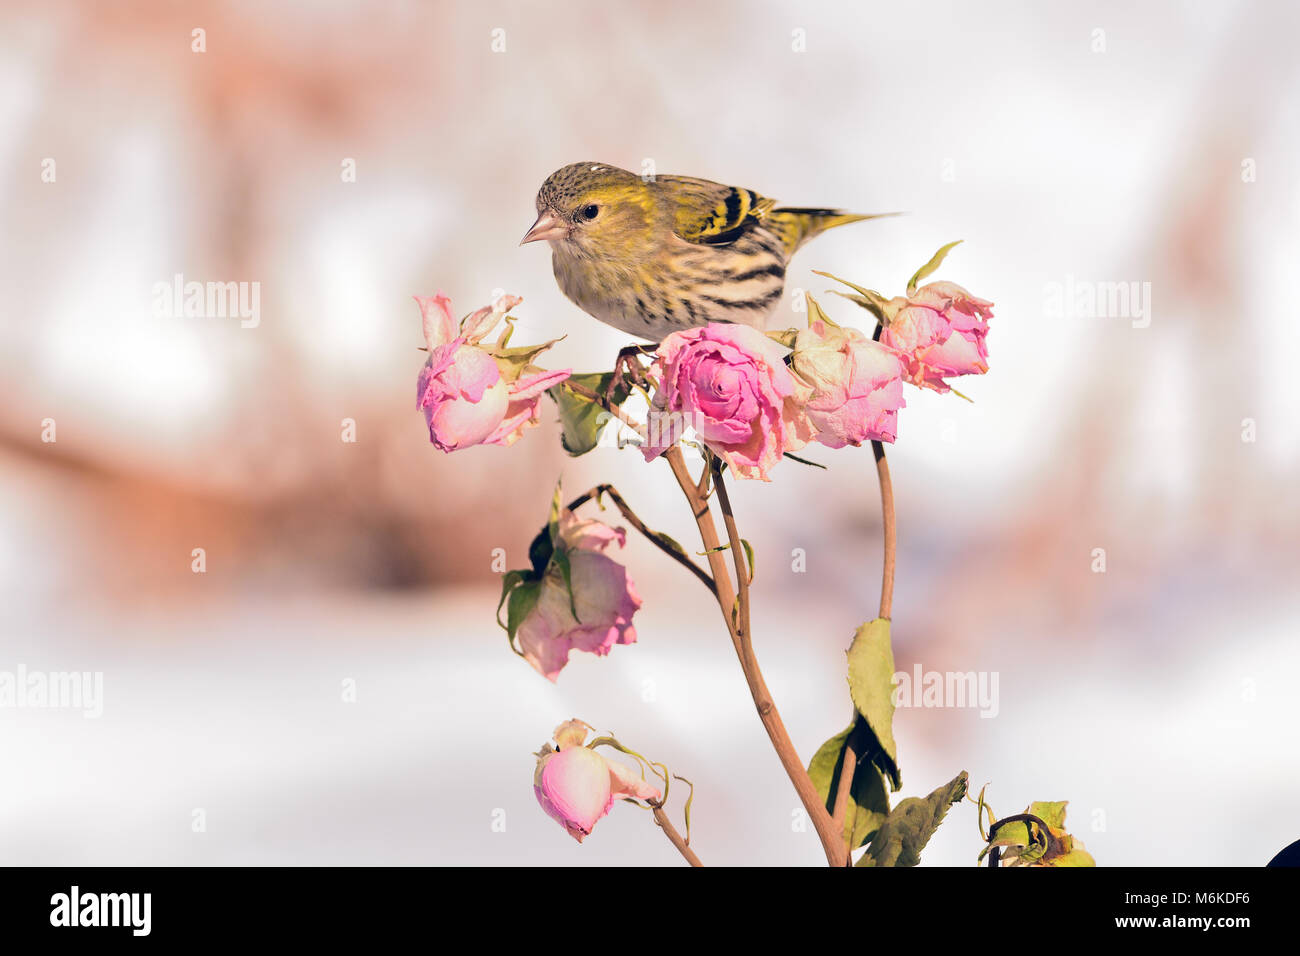 Small eurasian siskin (Spinus spinus) sits on a rose flower branch with buds (as an illustration of the Spring Festival). Stock Photo